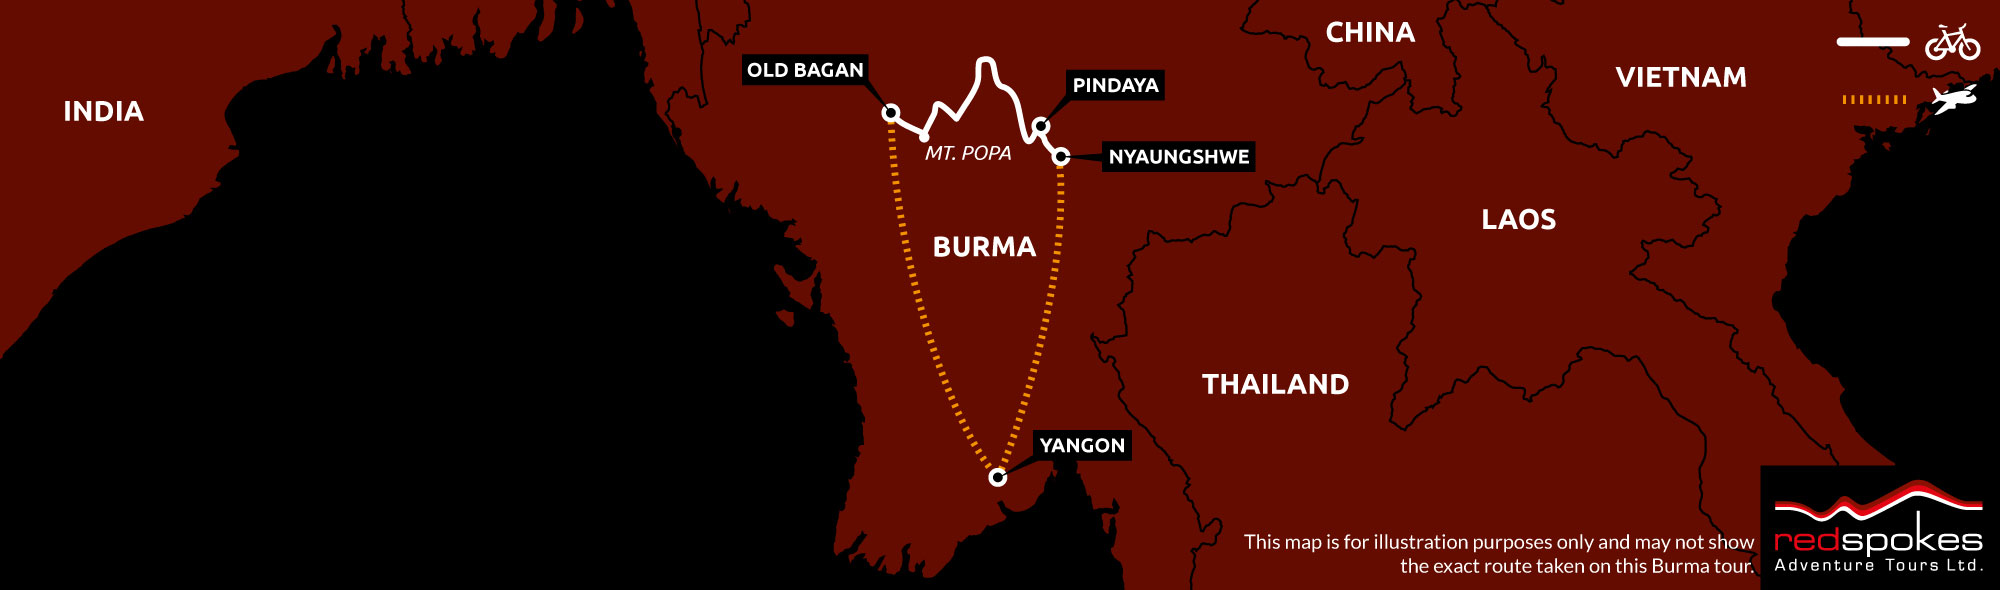 Example route for this Burma cycling holiday